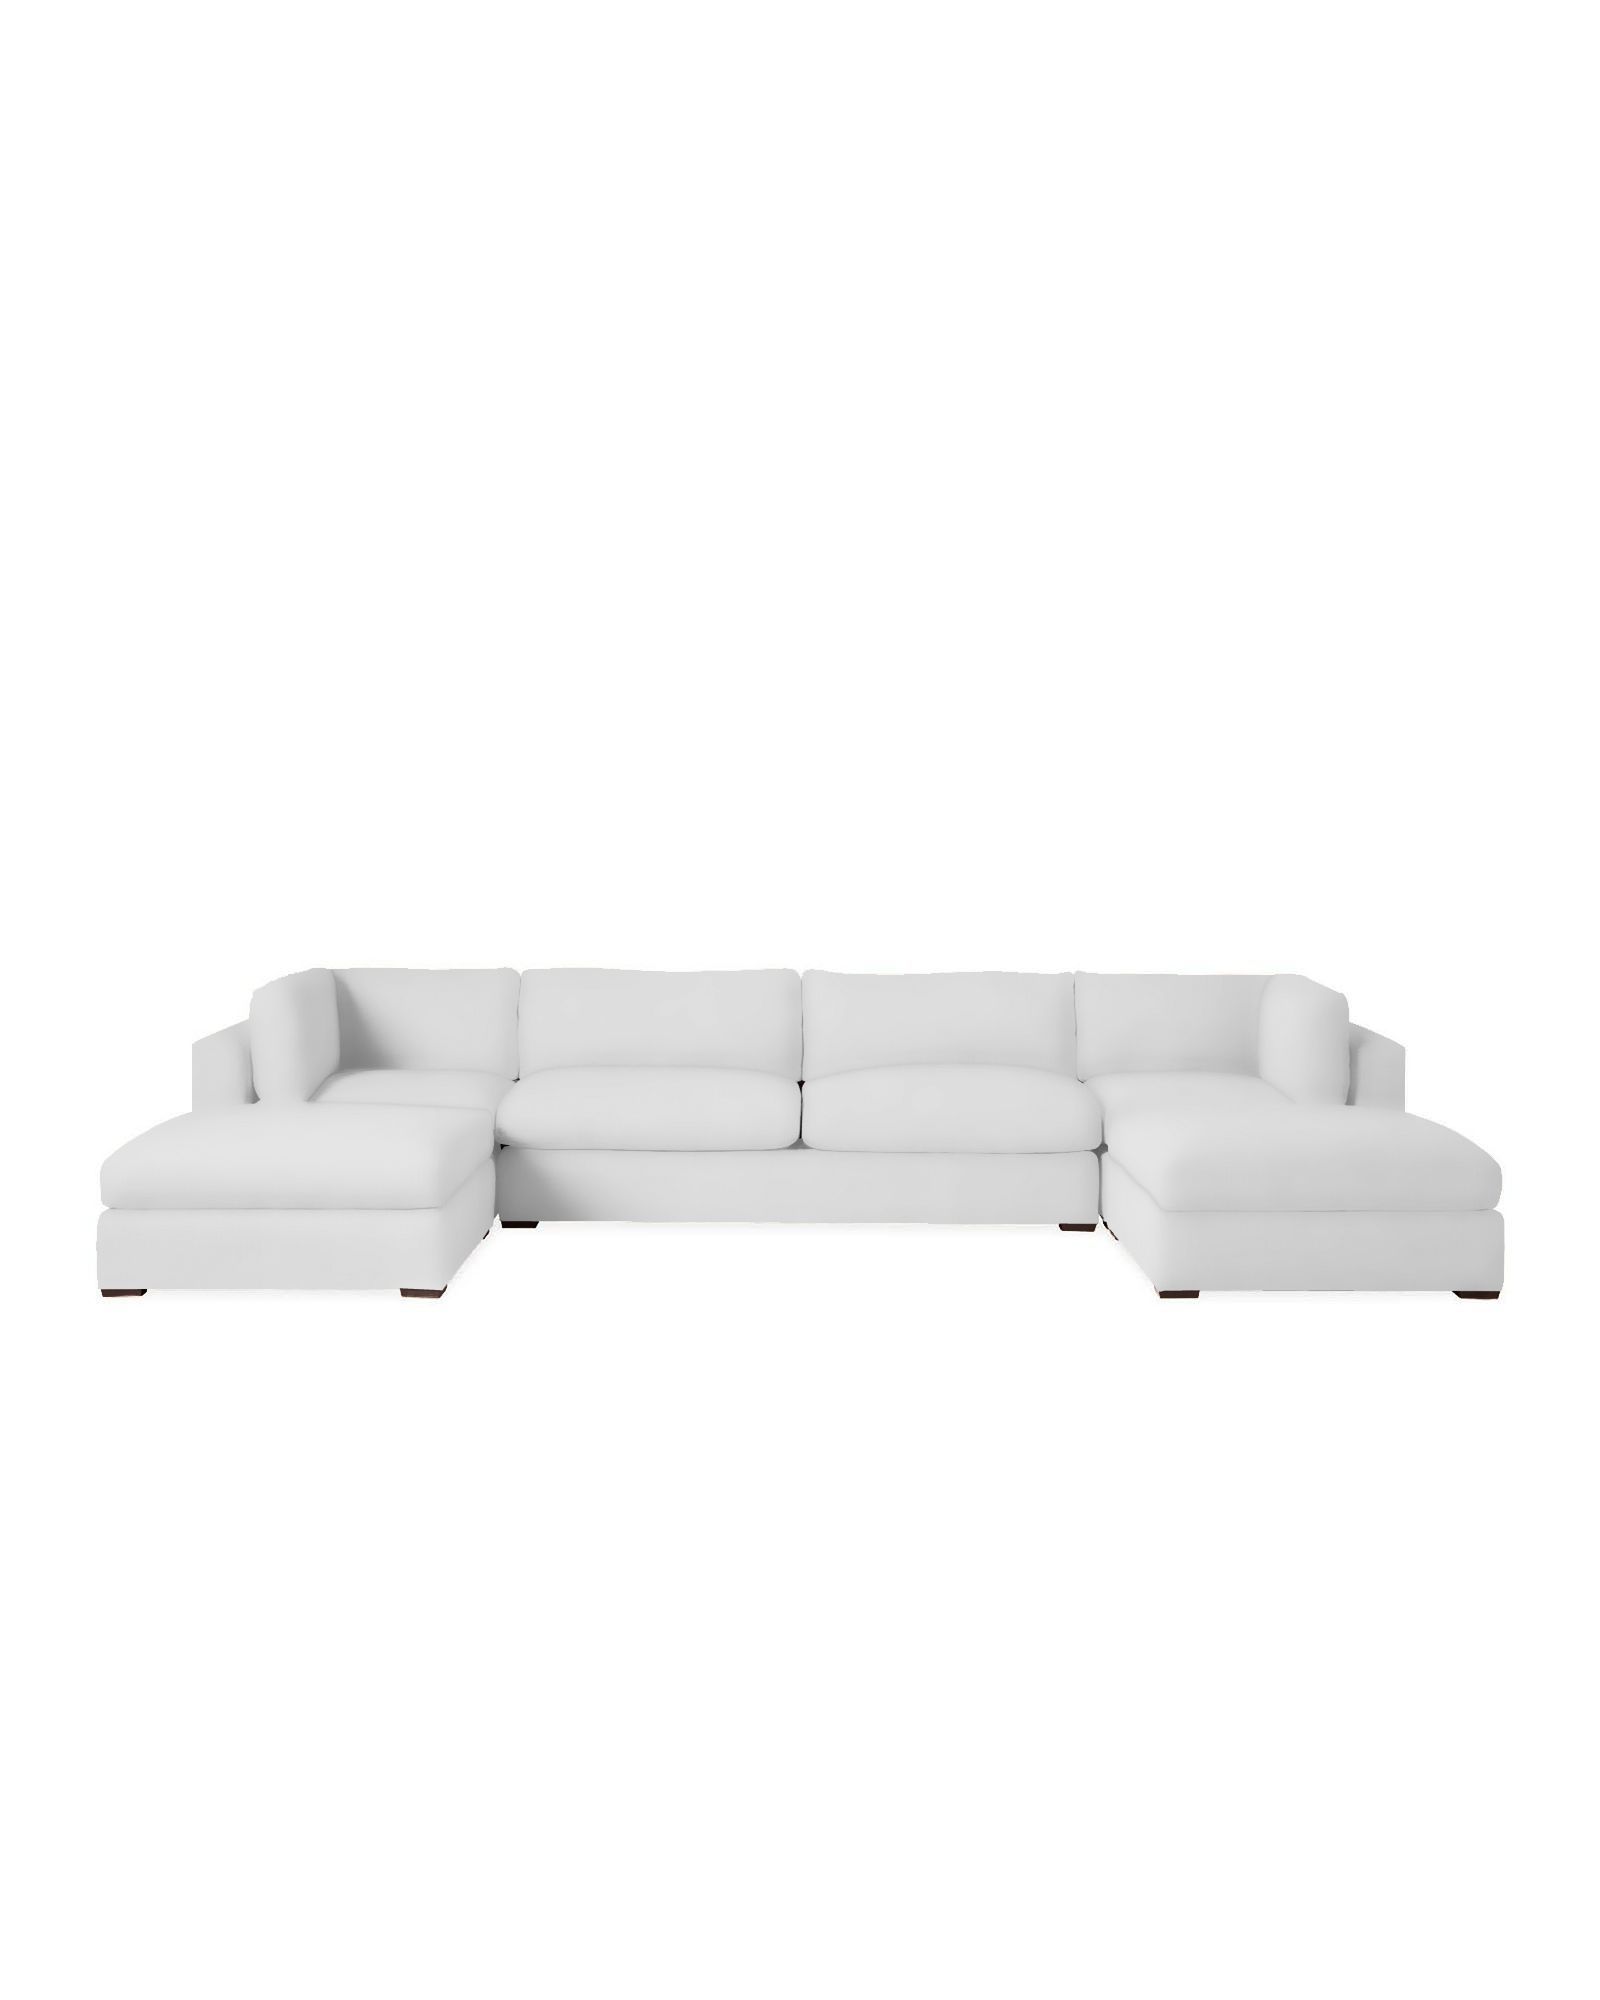 Haven Modular U-Sectional | Serena and Lily